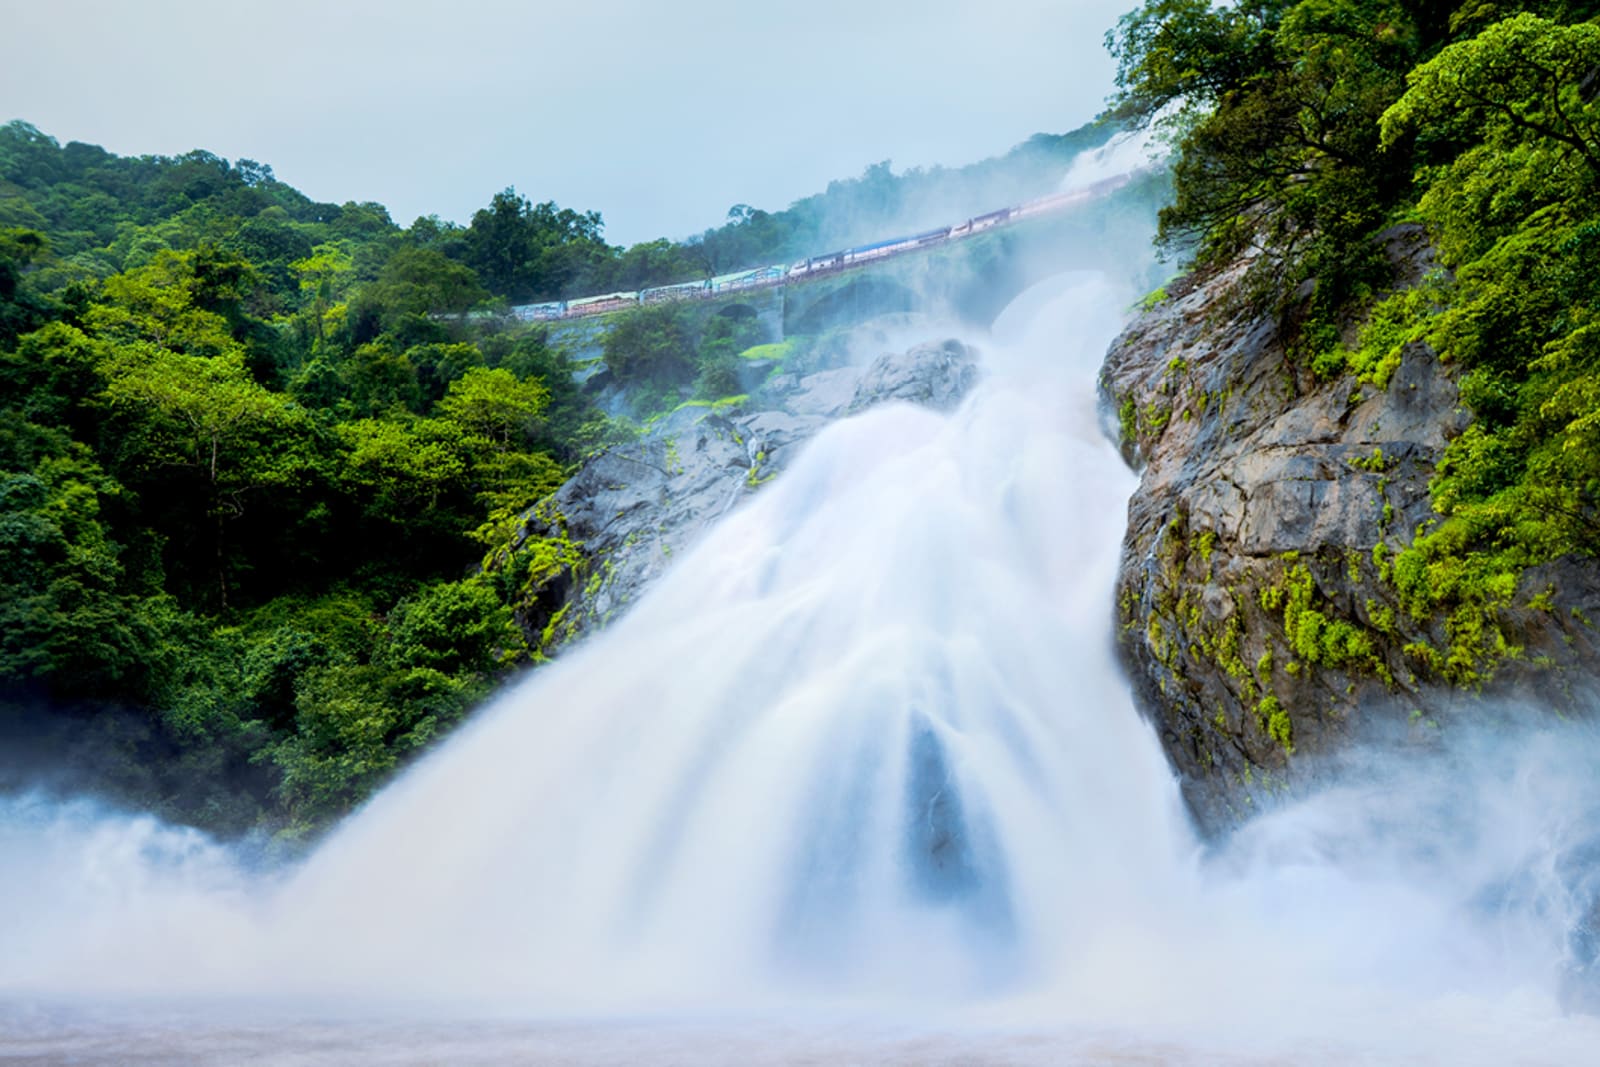 Dudhsagar Falls is also known as the "Sea of Milk"